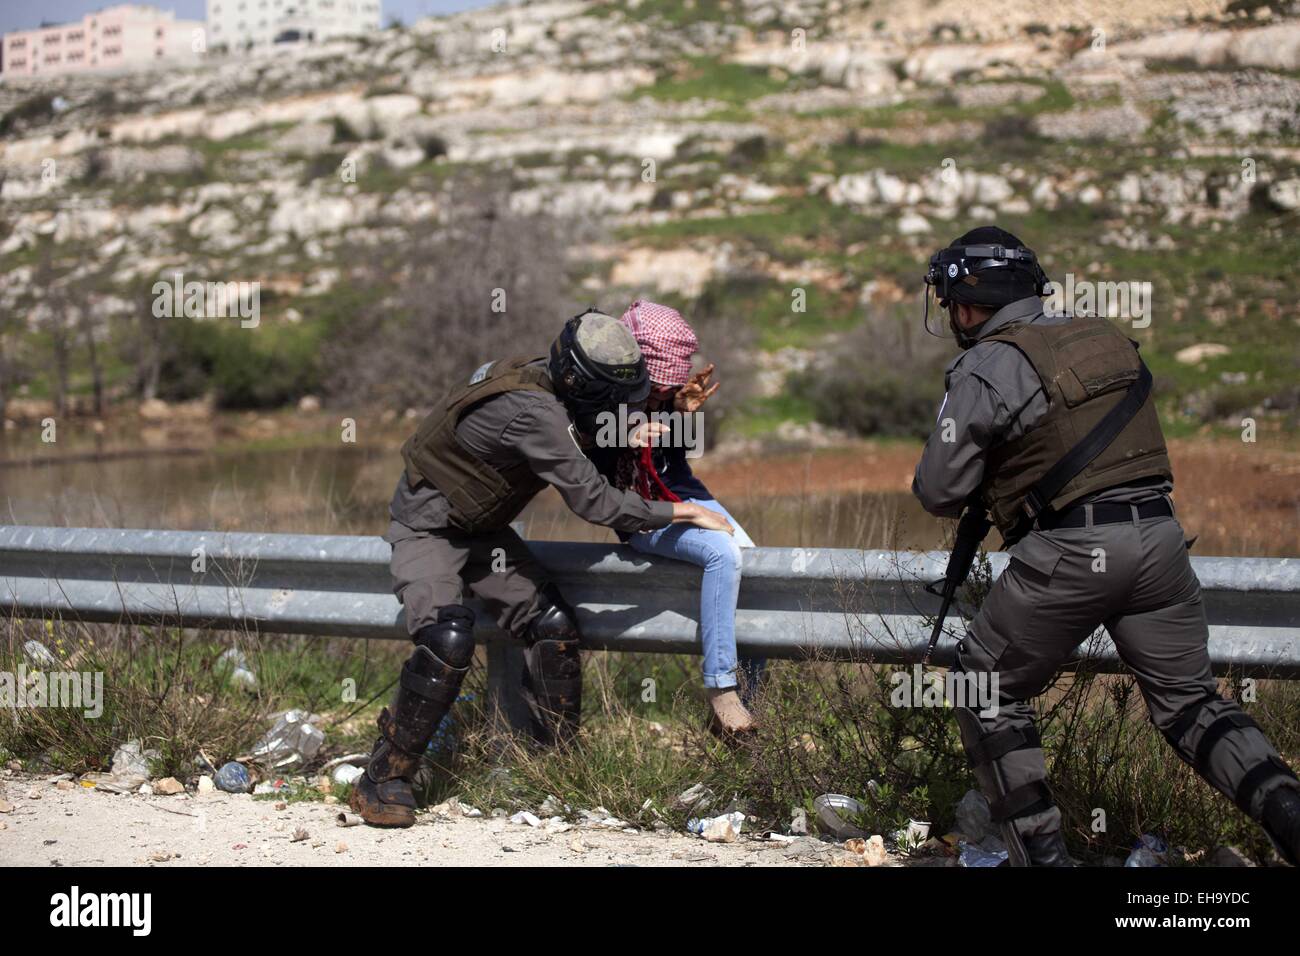 Ramallah, West Bank, Palestinian Territory. 10th Mar, 2015. Israeli border policemen detain a Palestinian girl during clashes at a protest calling for the release of Palestinian students held in Israeli jails, near Israel's Ofer Prison, near the West Bank city of Ramallah, March 10, 2015 Credit:  Shadi Hatem/APA Images/ZUMA Wire/Alamy Live News Stock Photo